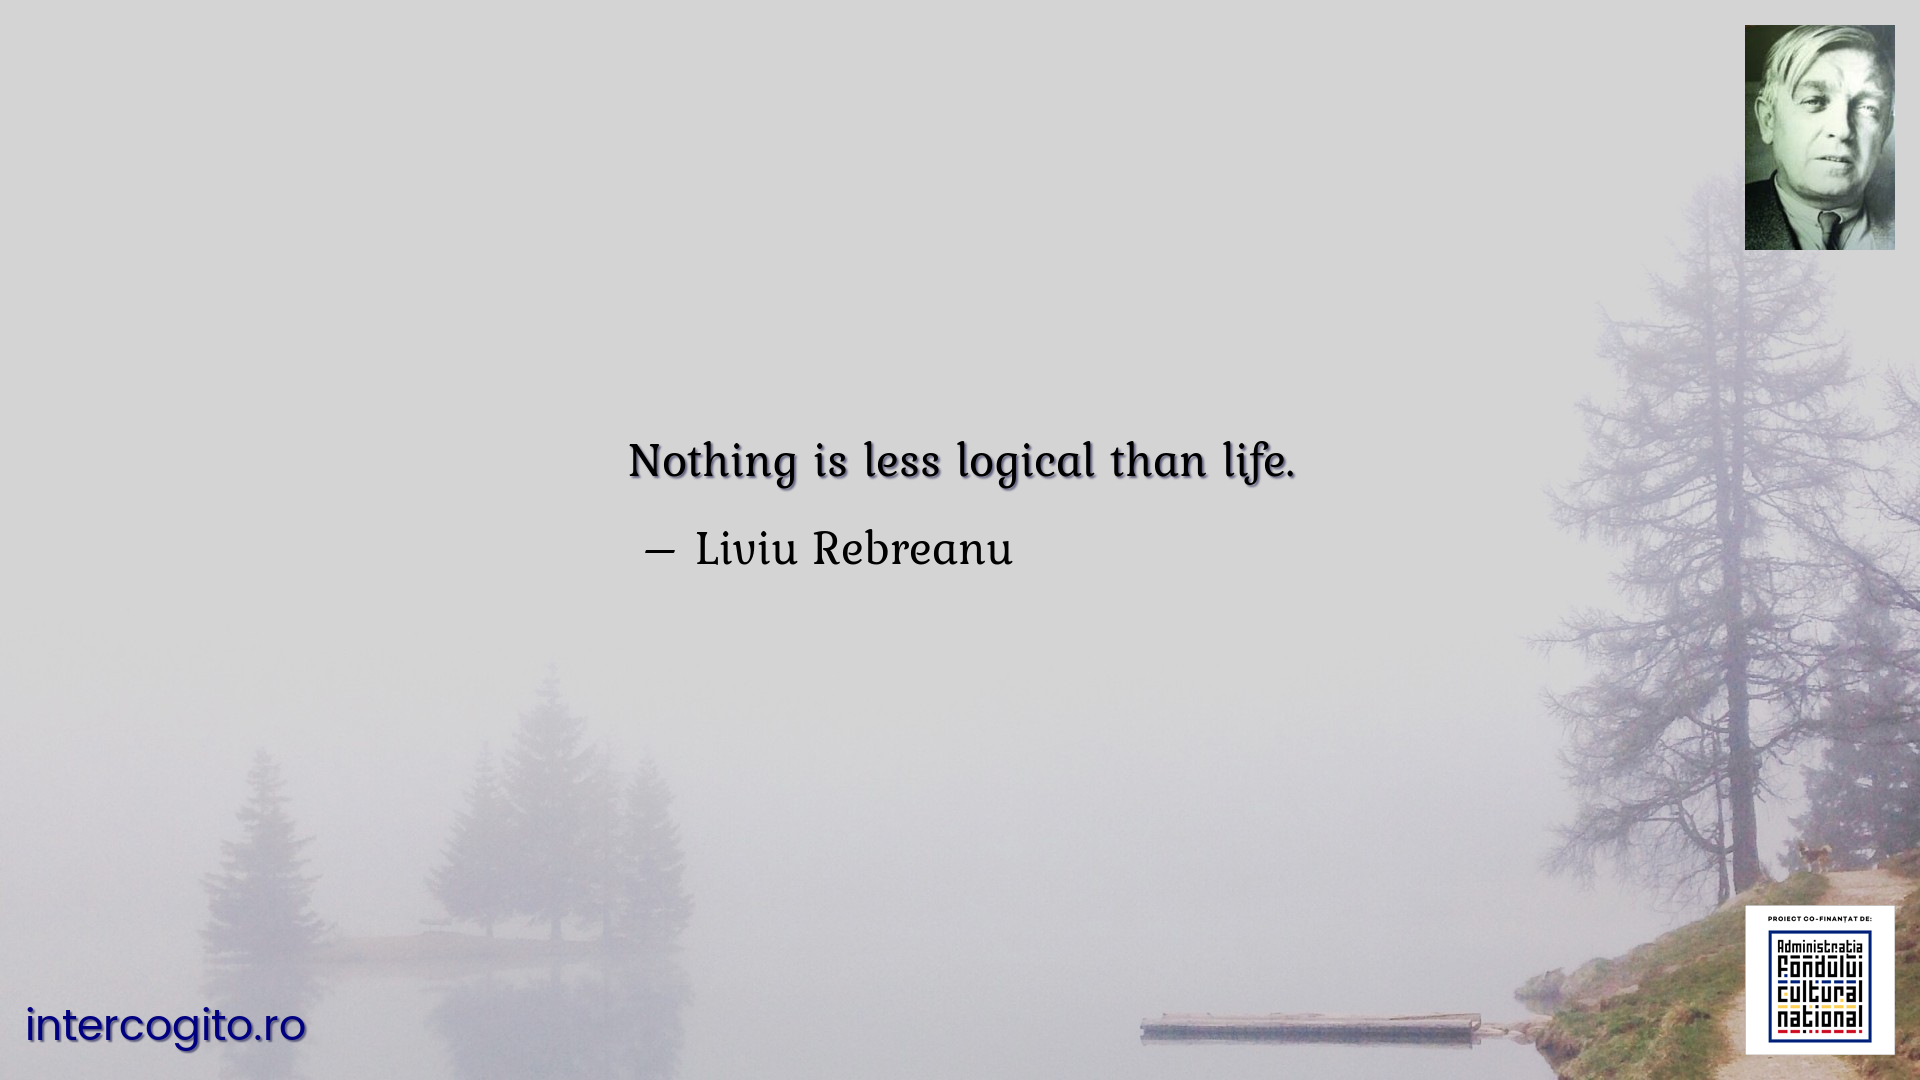 Nothing is less logical than life.